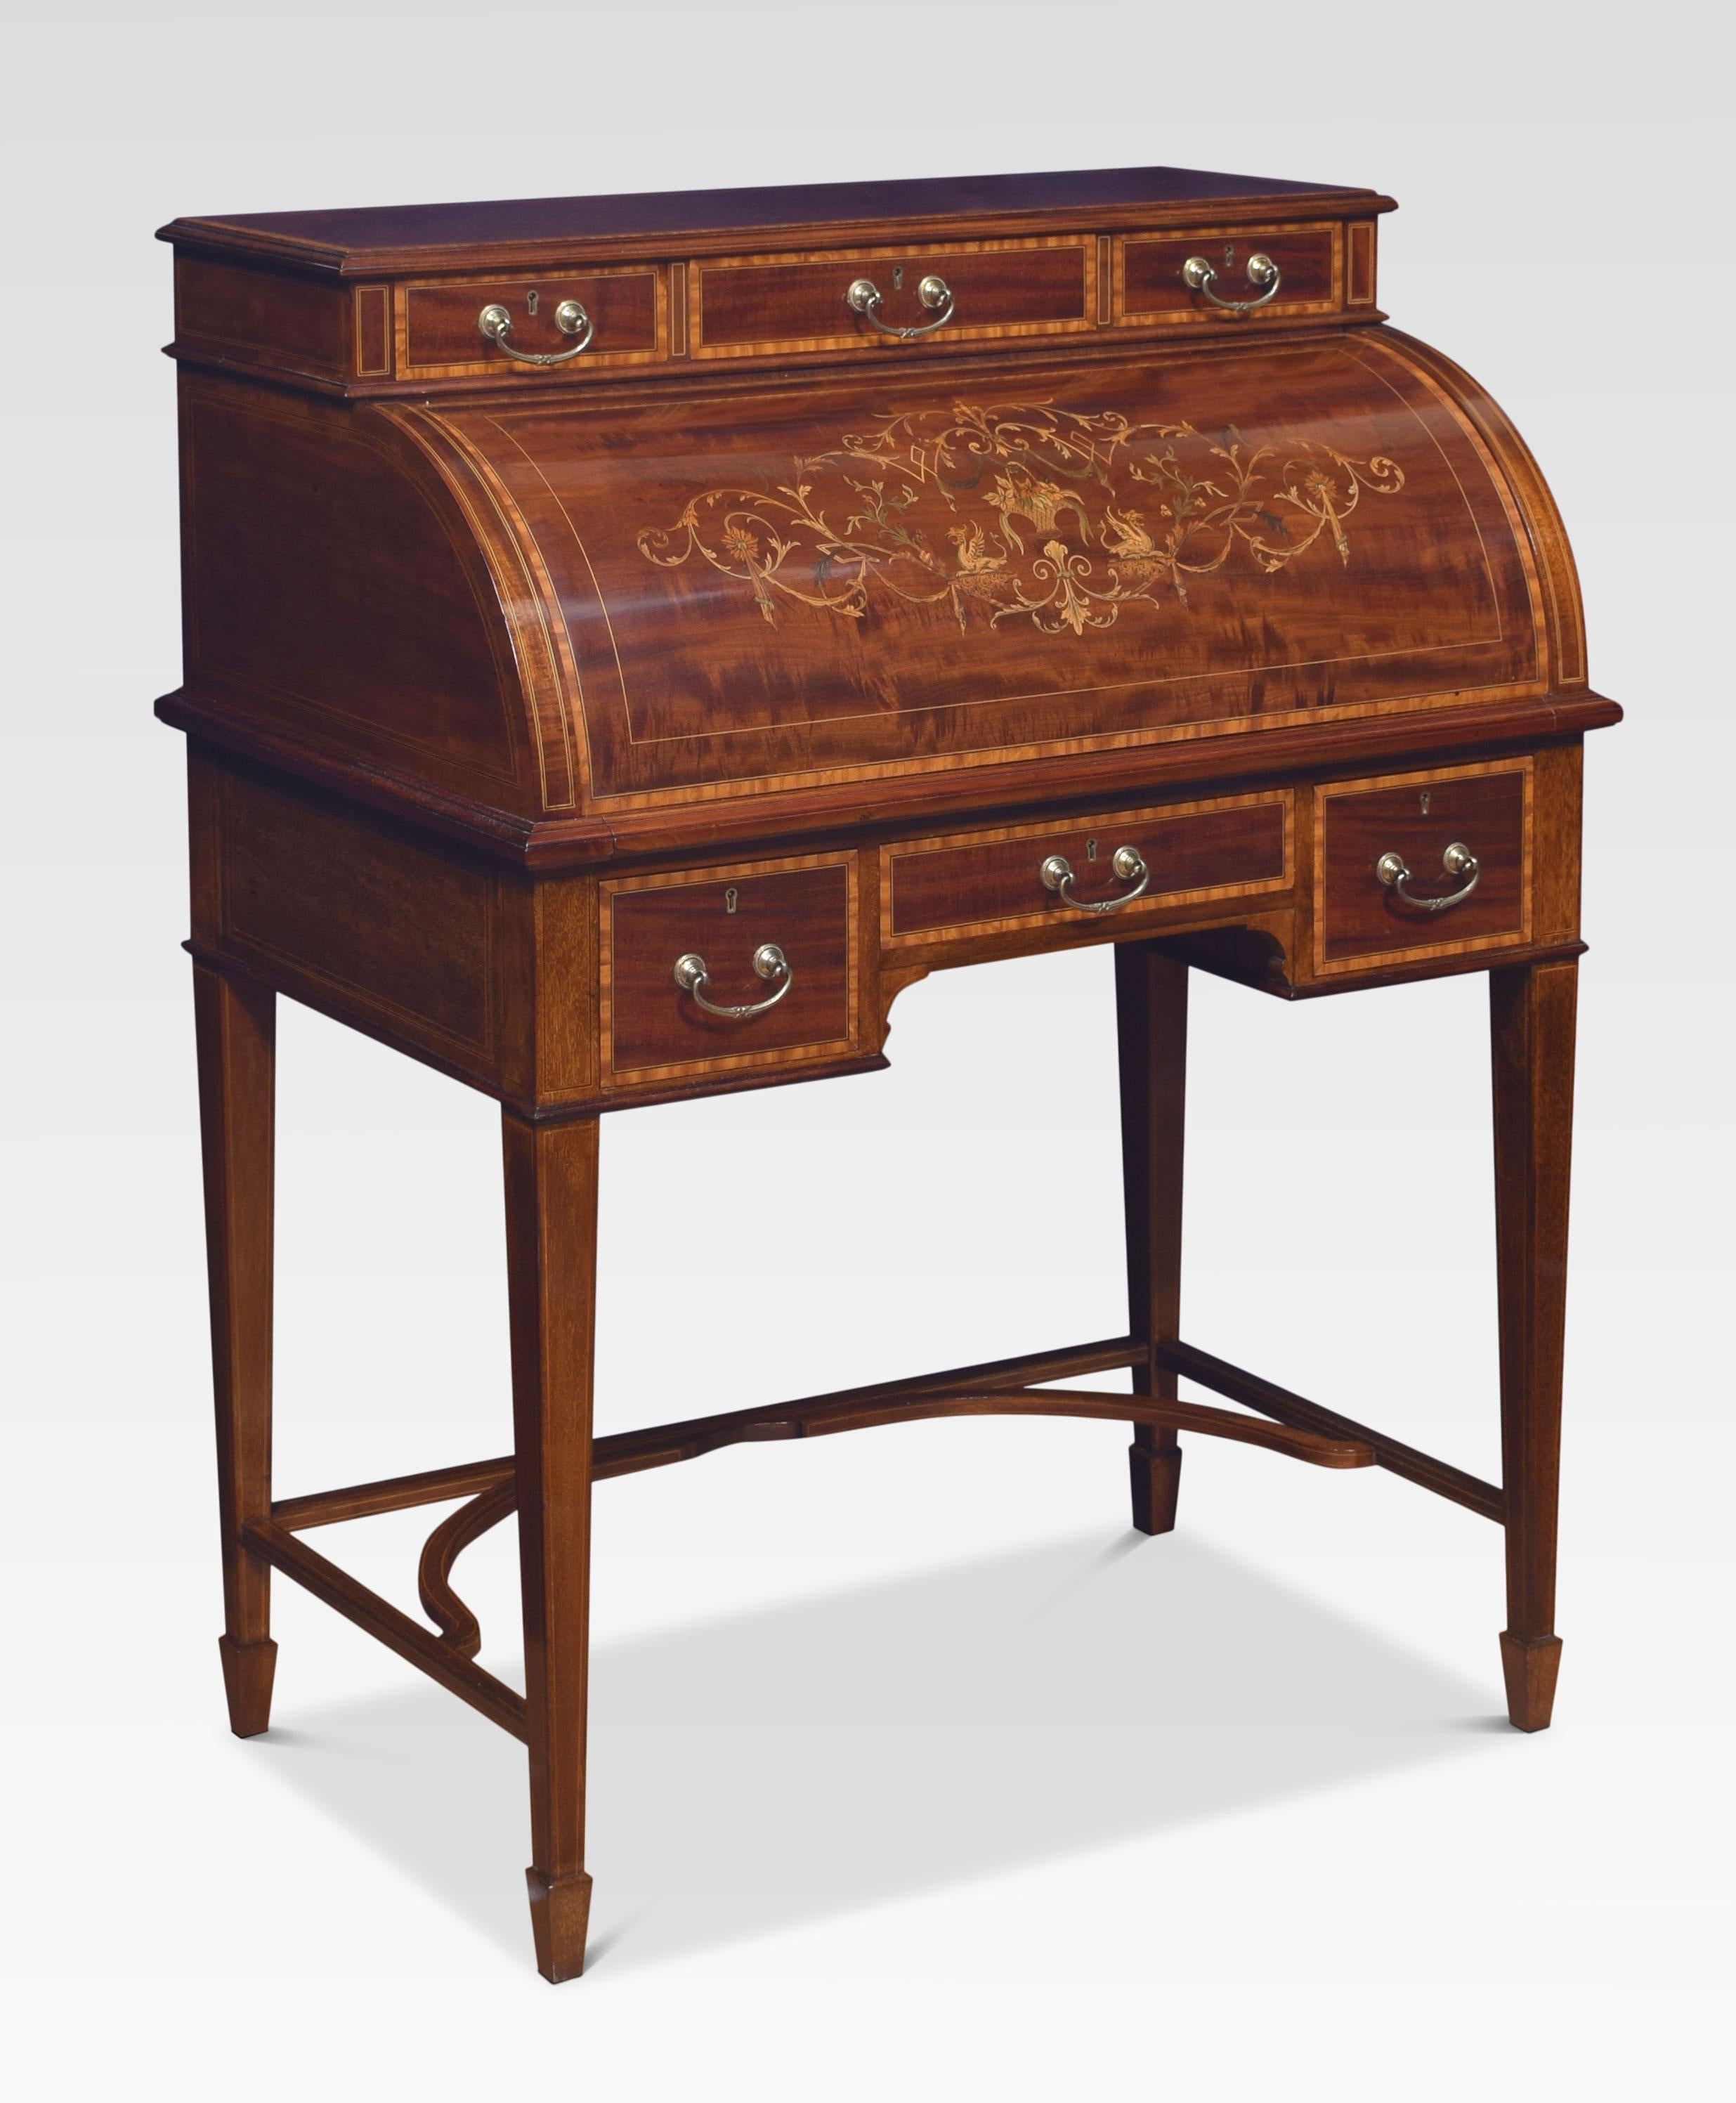 Mahogany cylinder desk, the rectangular top section with satinwood edge over an inlaid fall enclosing a leather-lined writing slide and fitted interior and a further frieze drawer below, raised on square tapered legs.
Dimensions
Height 41